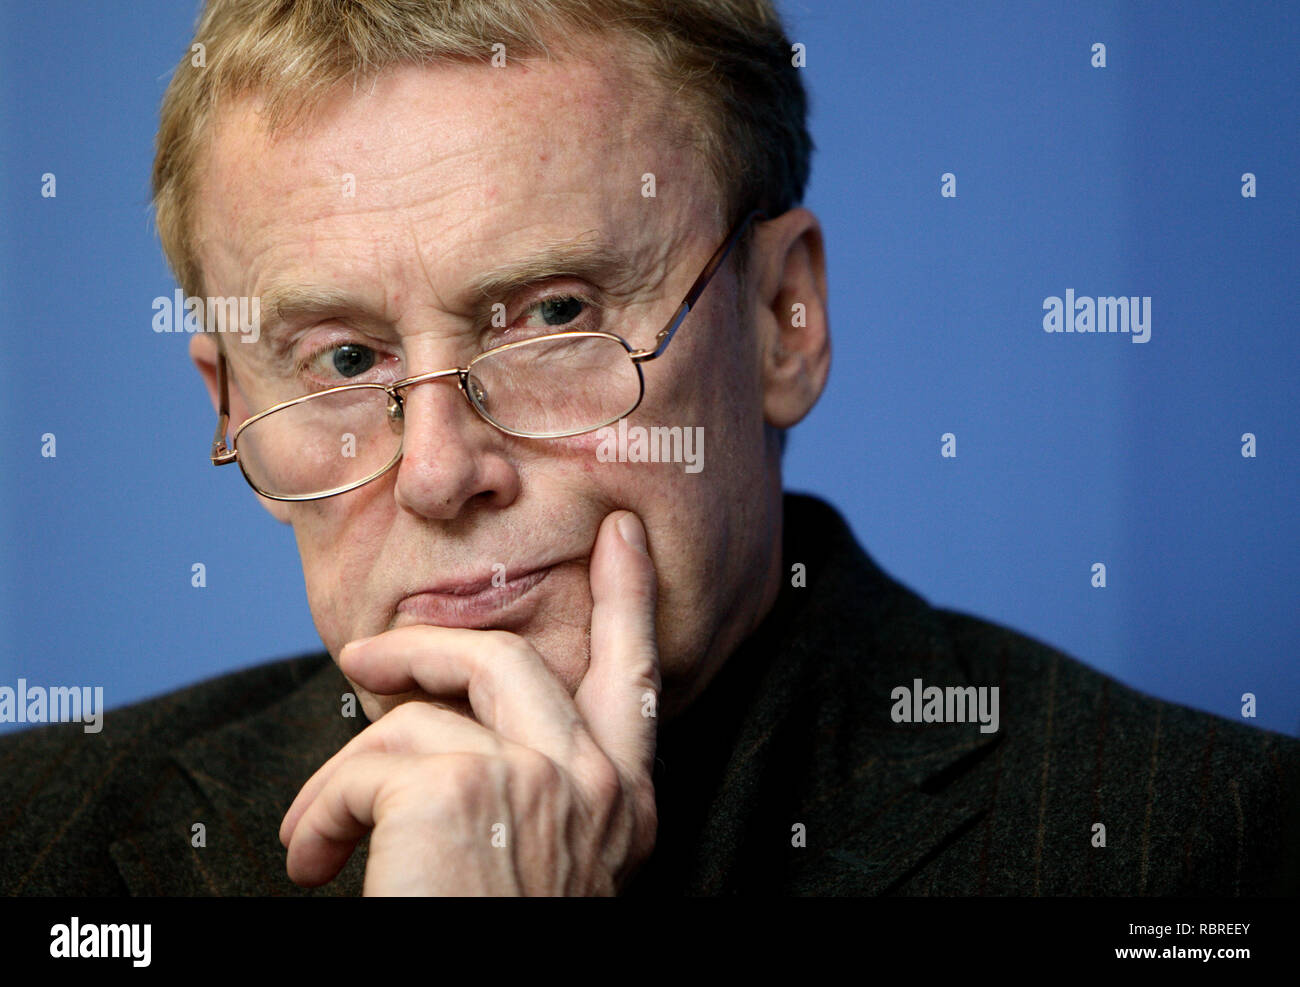 Warsaw, Mazovia / Poland - 2007/10/04: Daniel Olbrychski - polish film actor and theatre actor in a press meeting with media Stock Photo